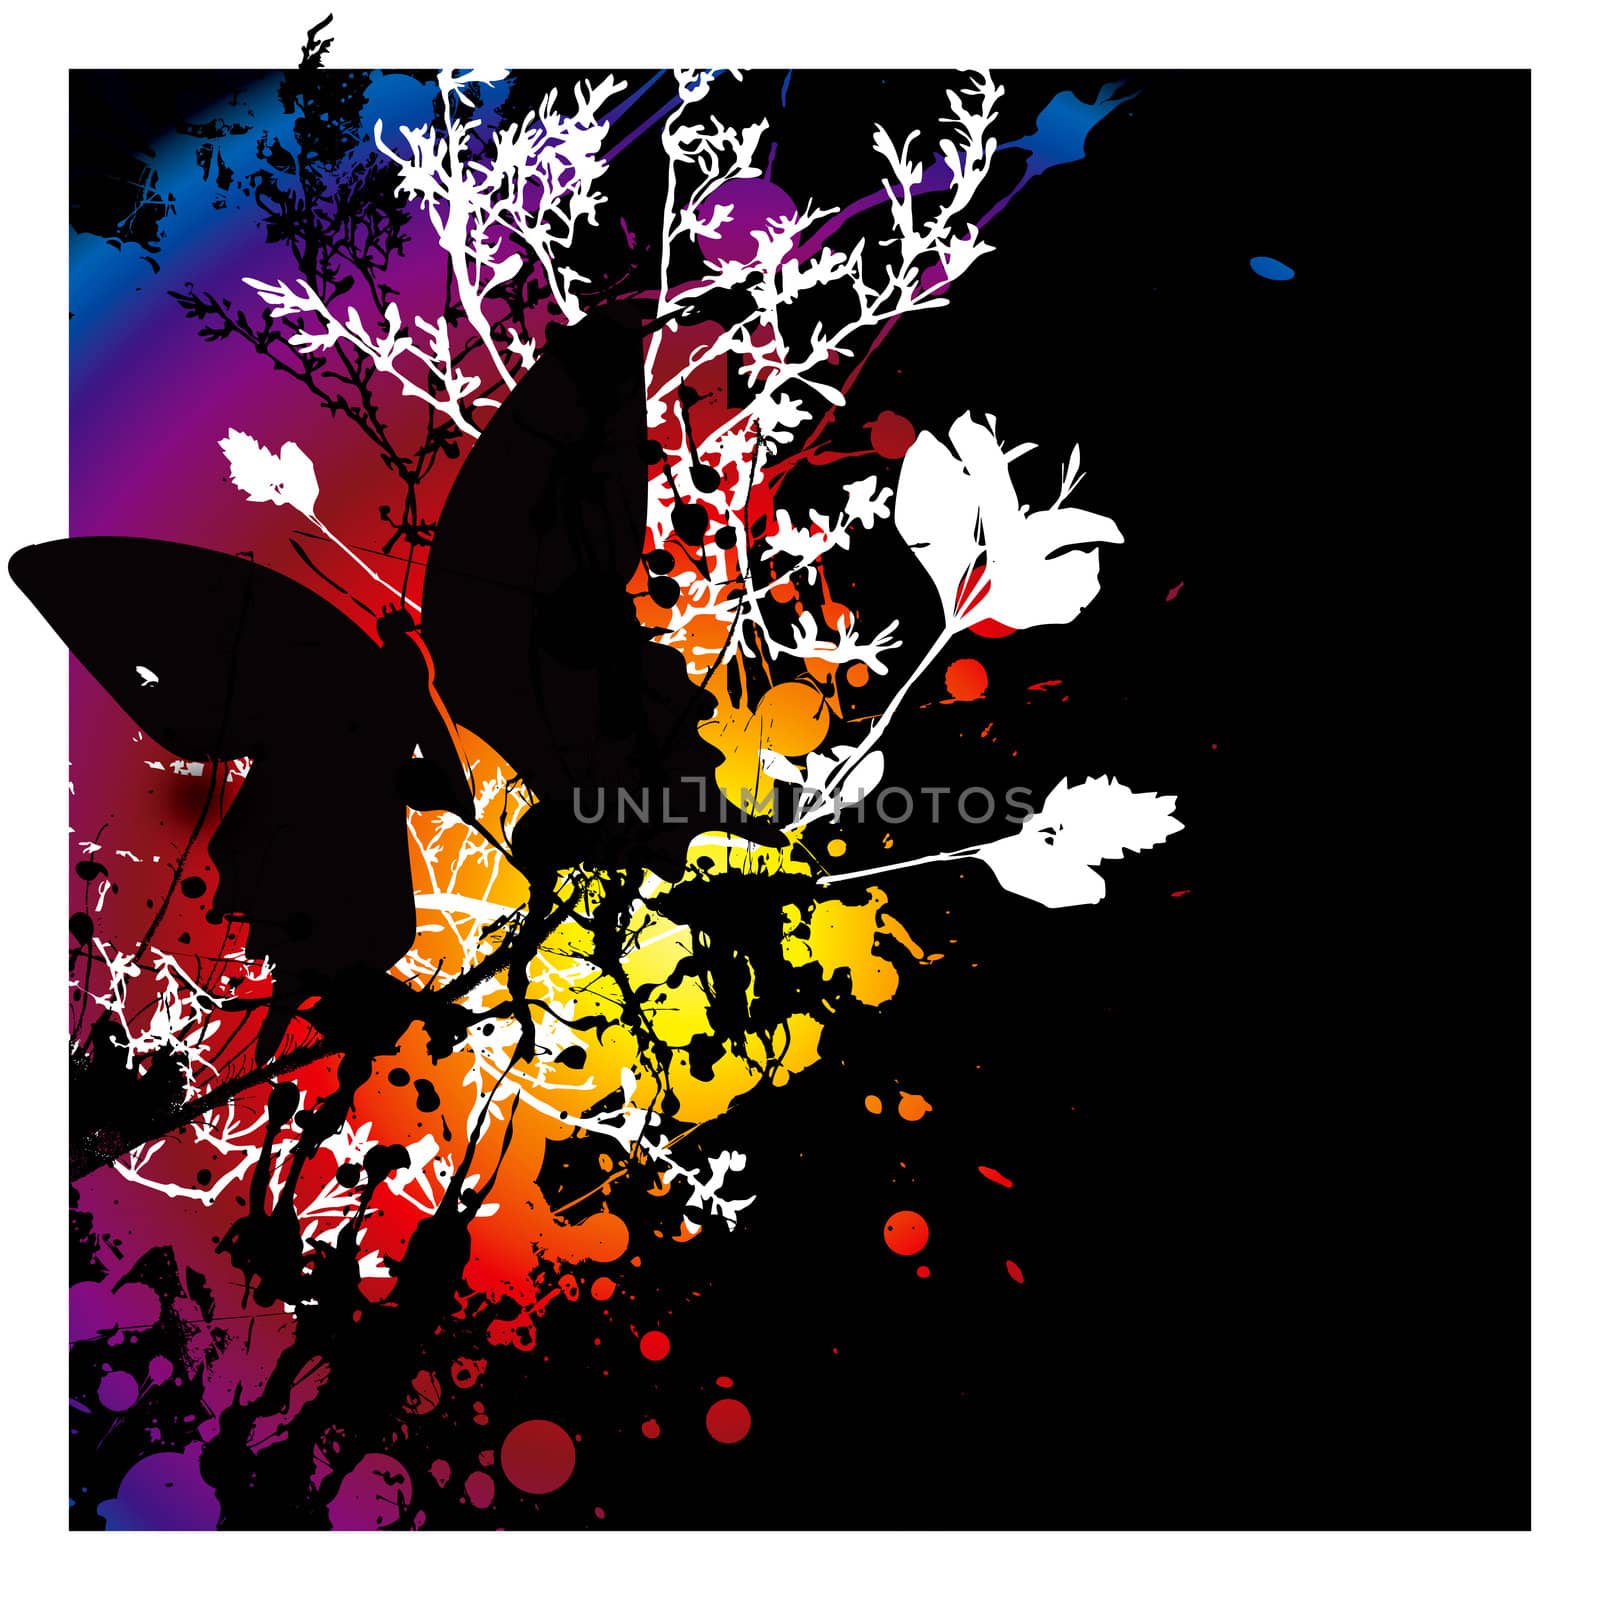 dark gothic style abstract image with floral elements and a butterfly